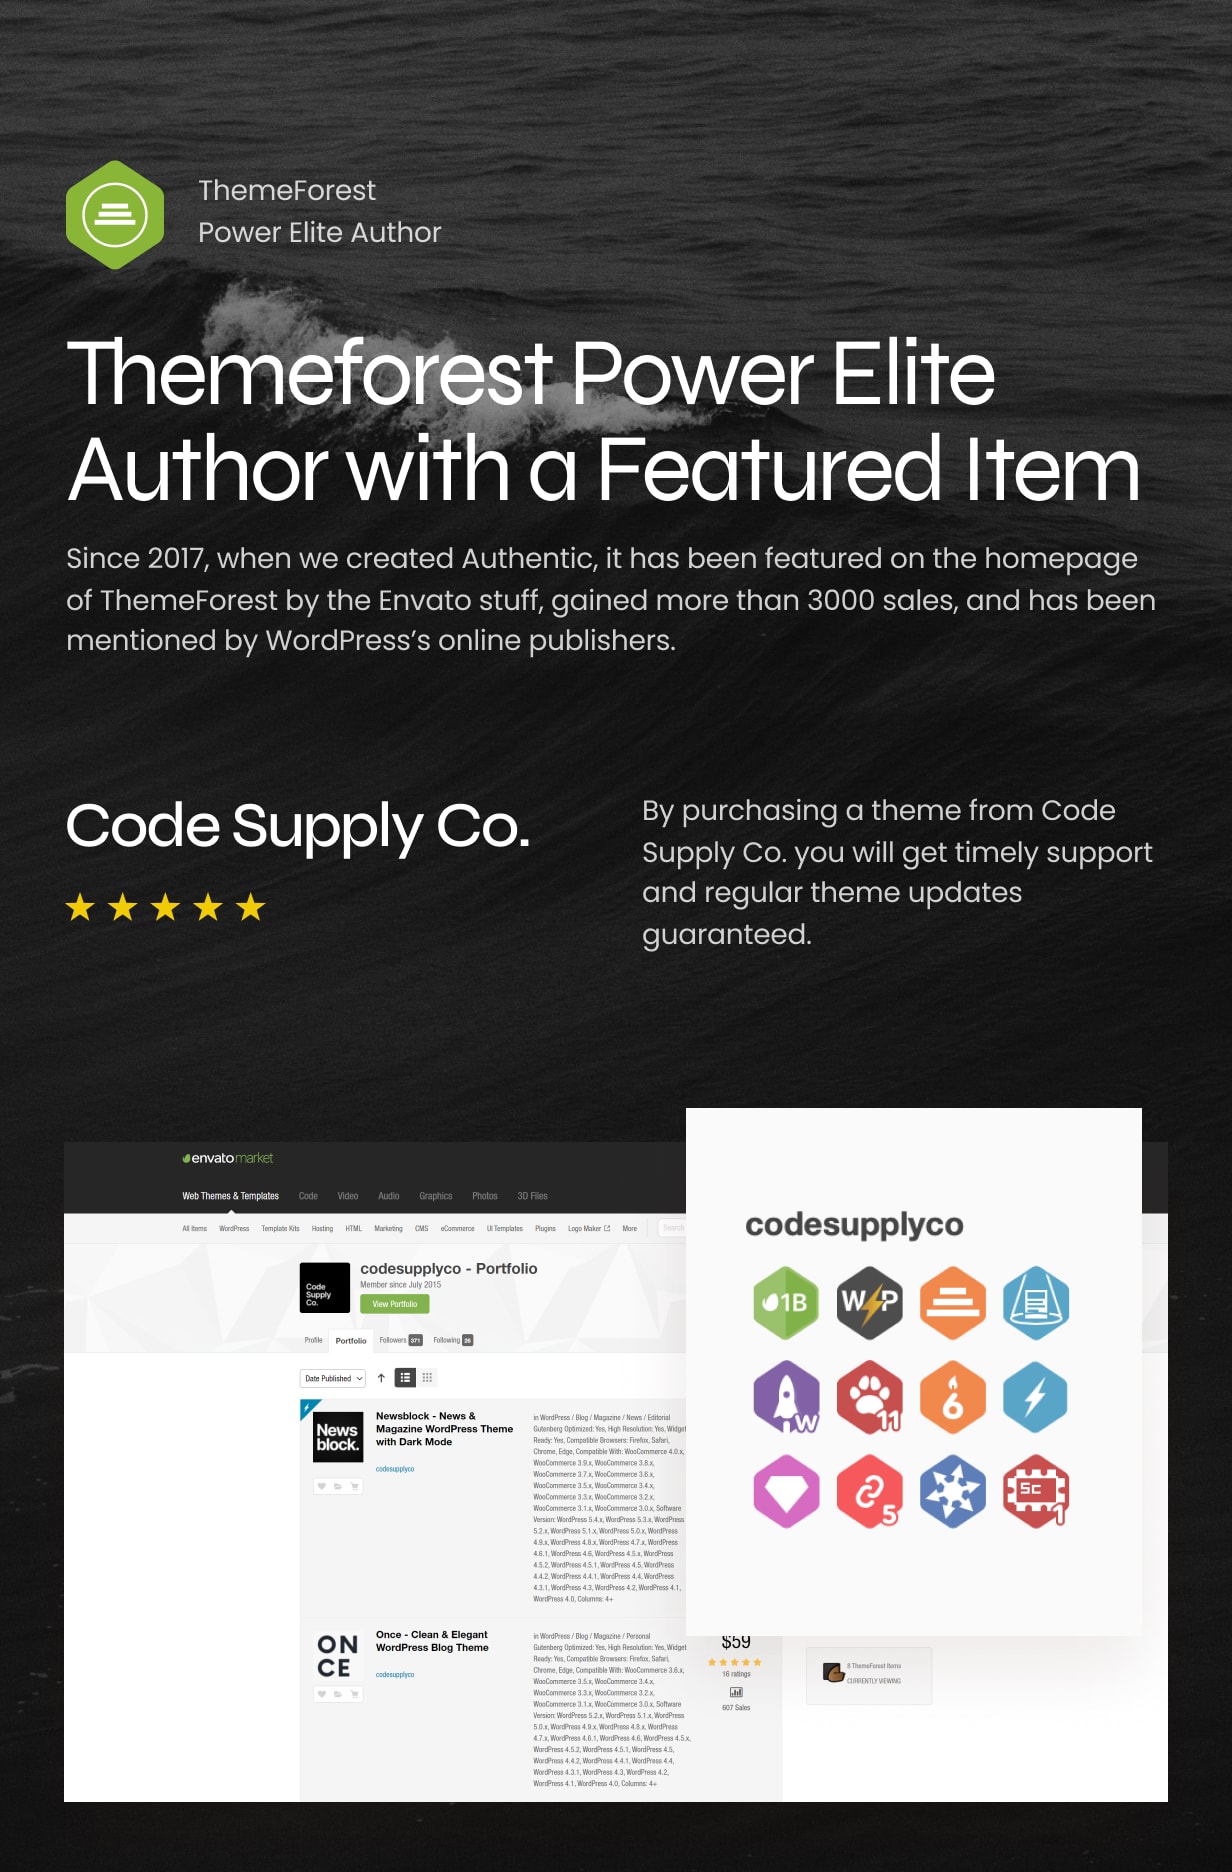 Themeforest Power elite author with a featured item.